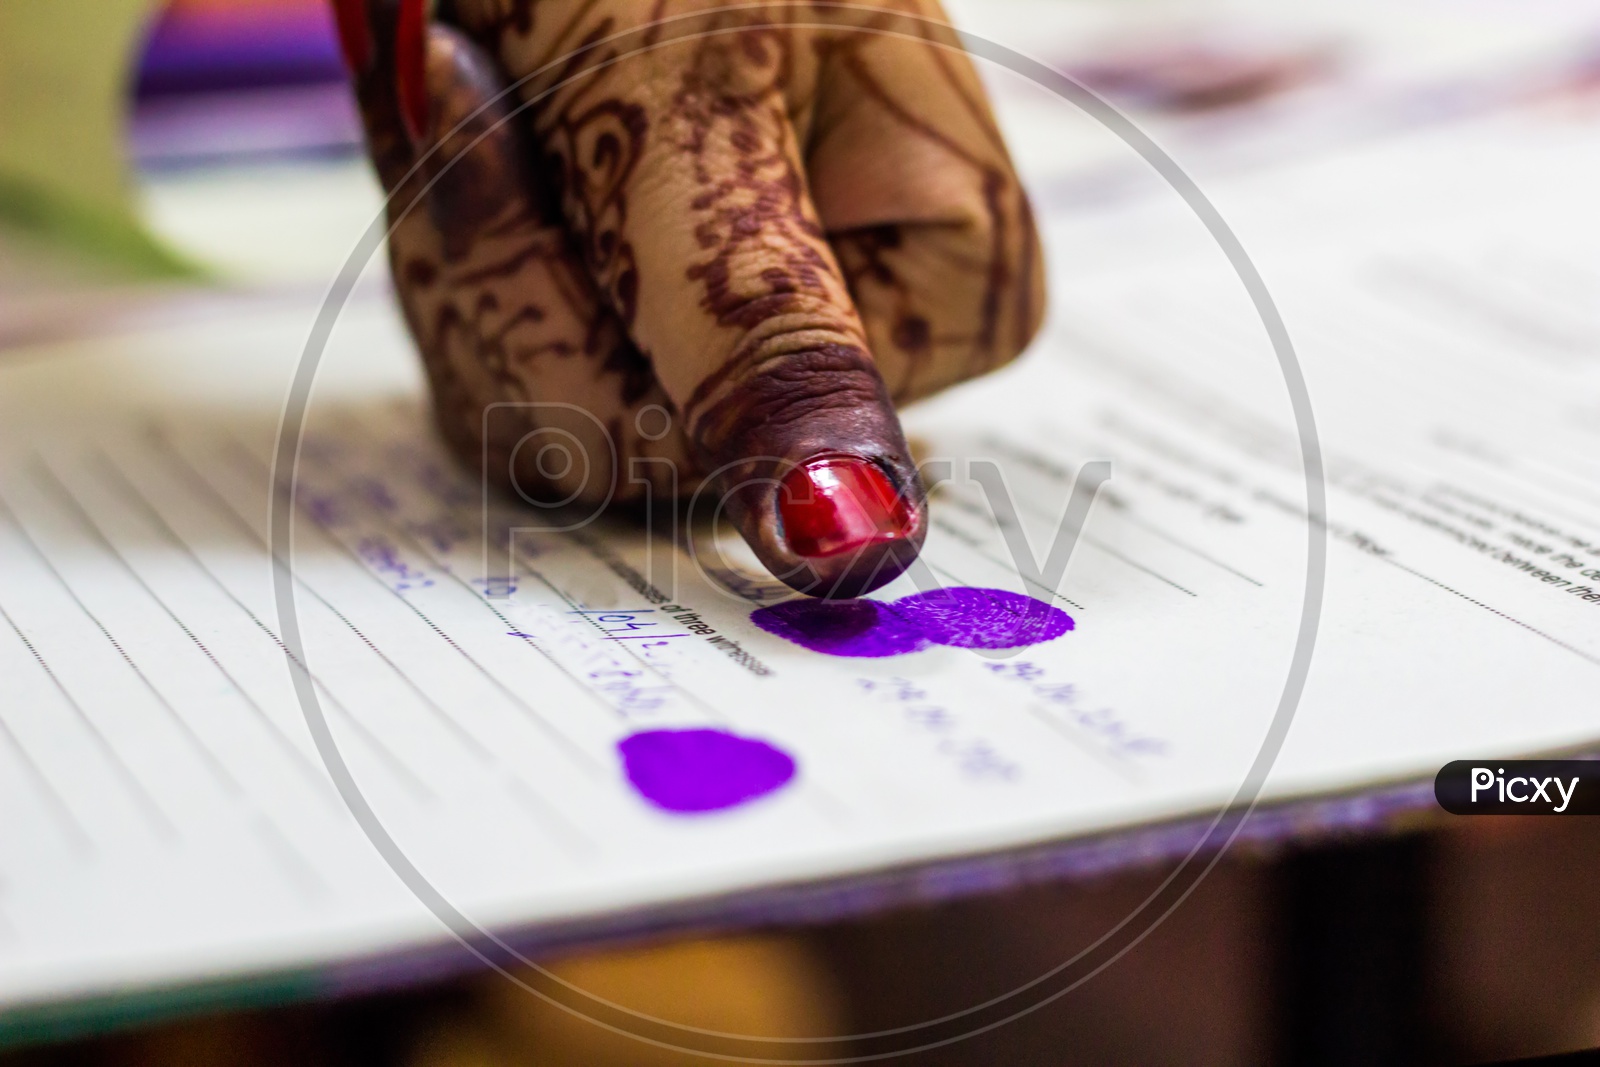 Lady Giving Thumb Impression On Marriage Registry Certificate. Indian Matrimony. Bengali Wedding